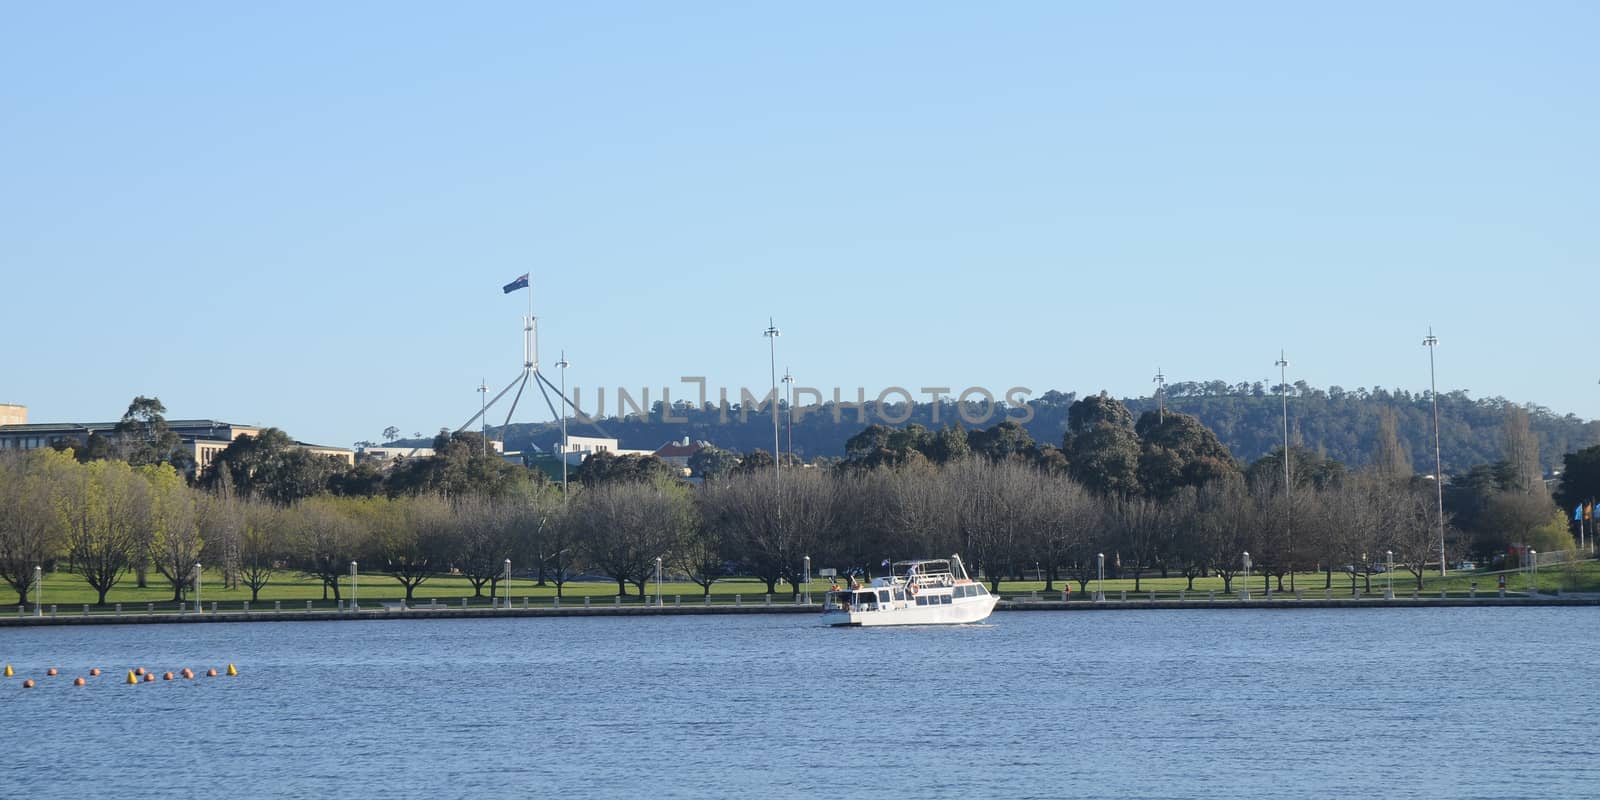 City lake and Australia parliament in Canberra by eyeofpaul